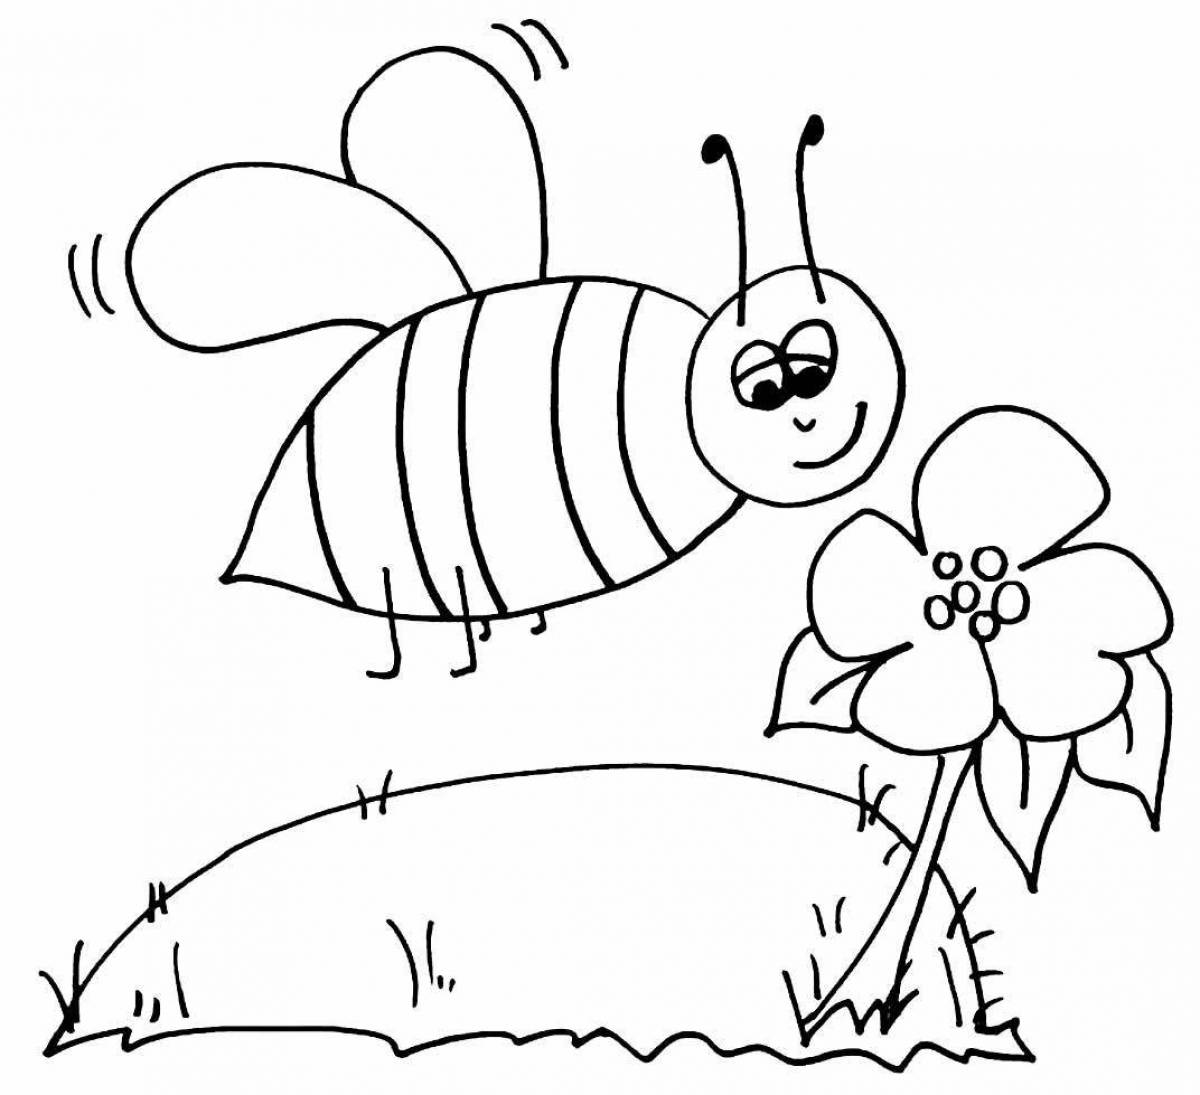 Bright bee coloring book for kids